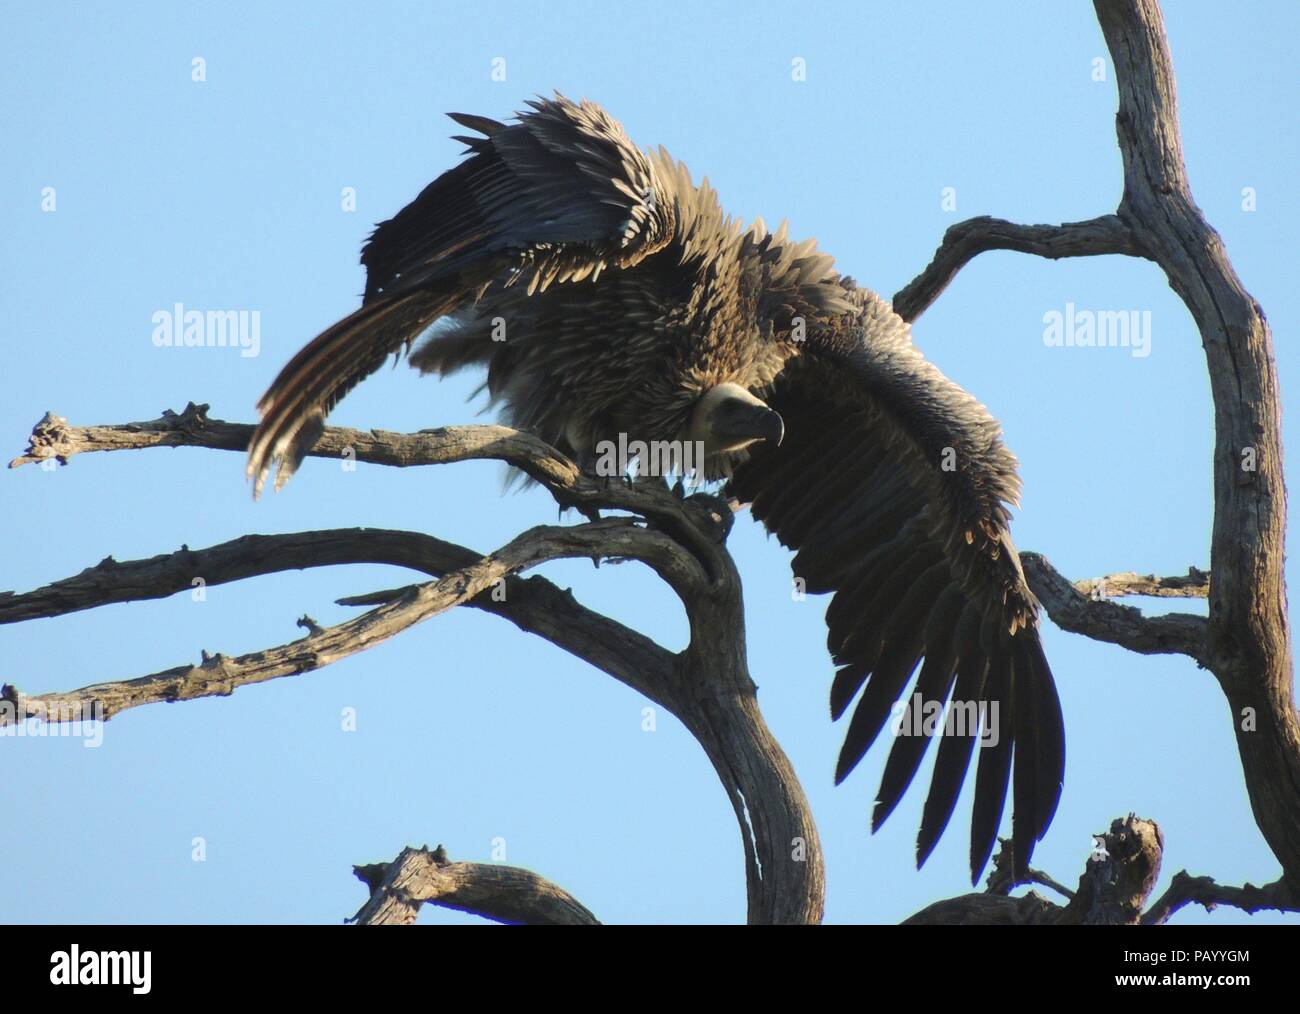 Vulture spreading its wings on a dead tree watching the surroundings Stock Photo